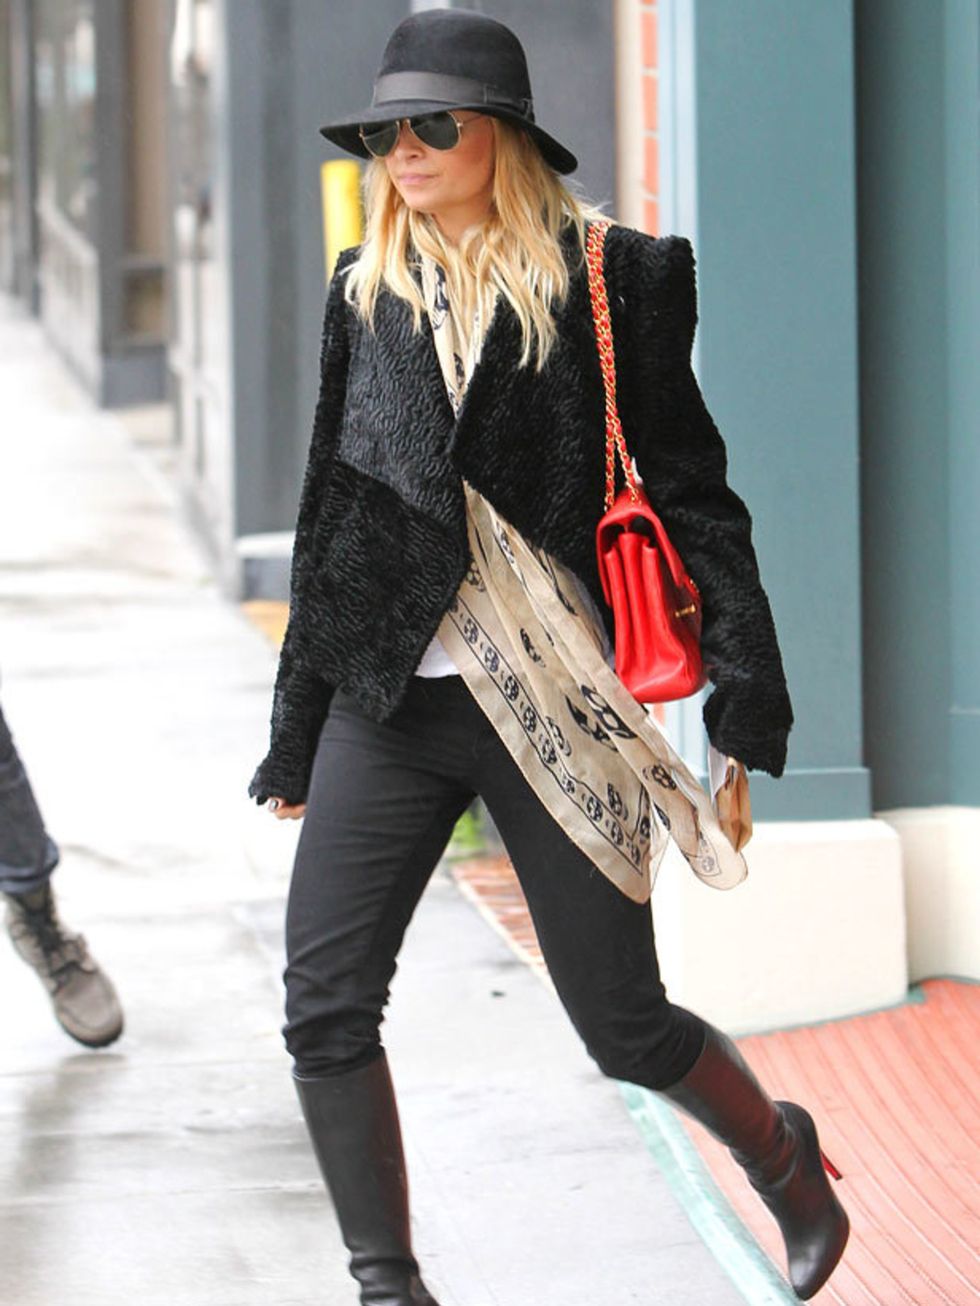 <p> <a href="http://www.elleuk.com/starstyle/style-files/%28section%29/nicole-richie/%28offset%29/0/%28img%29/542508">Nicole Richie</a> shopping at Barneys in New York, 21 December 2010 </p>